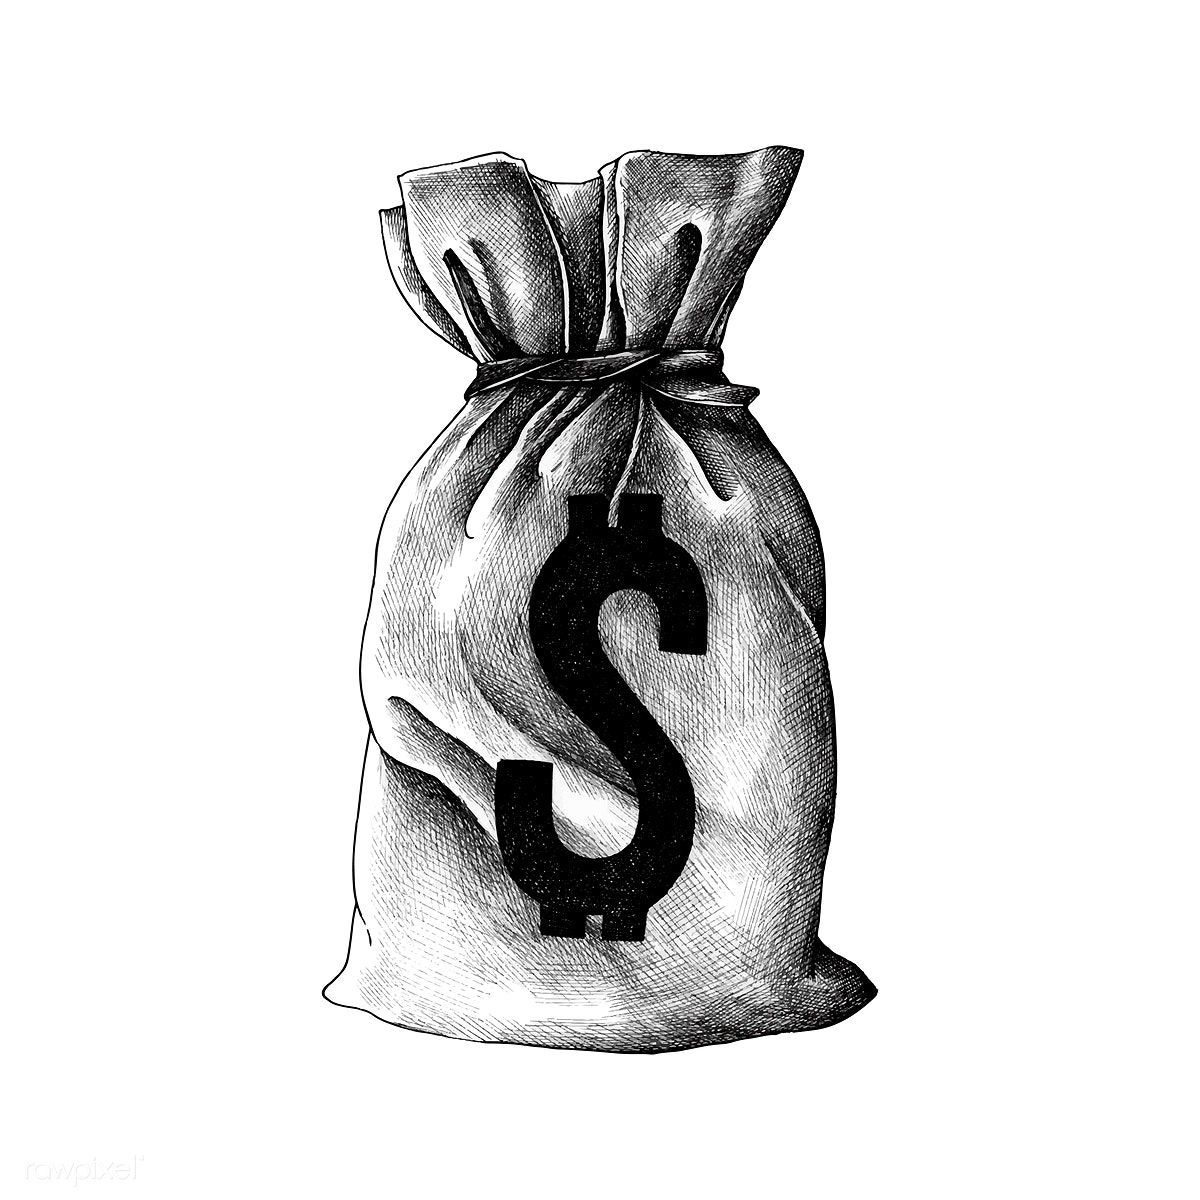 Download premium vector of Hand drawn old money bag 410648. How